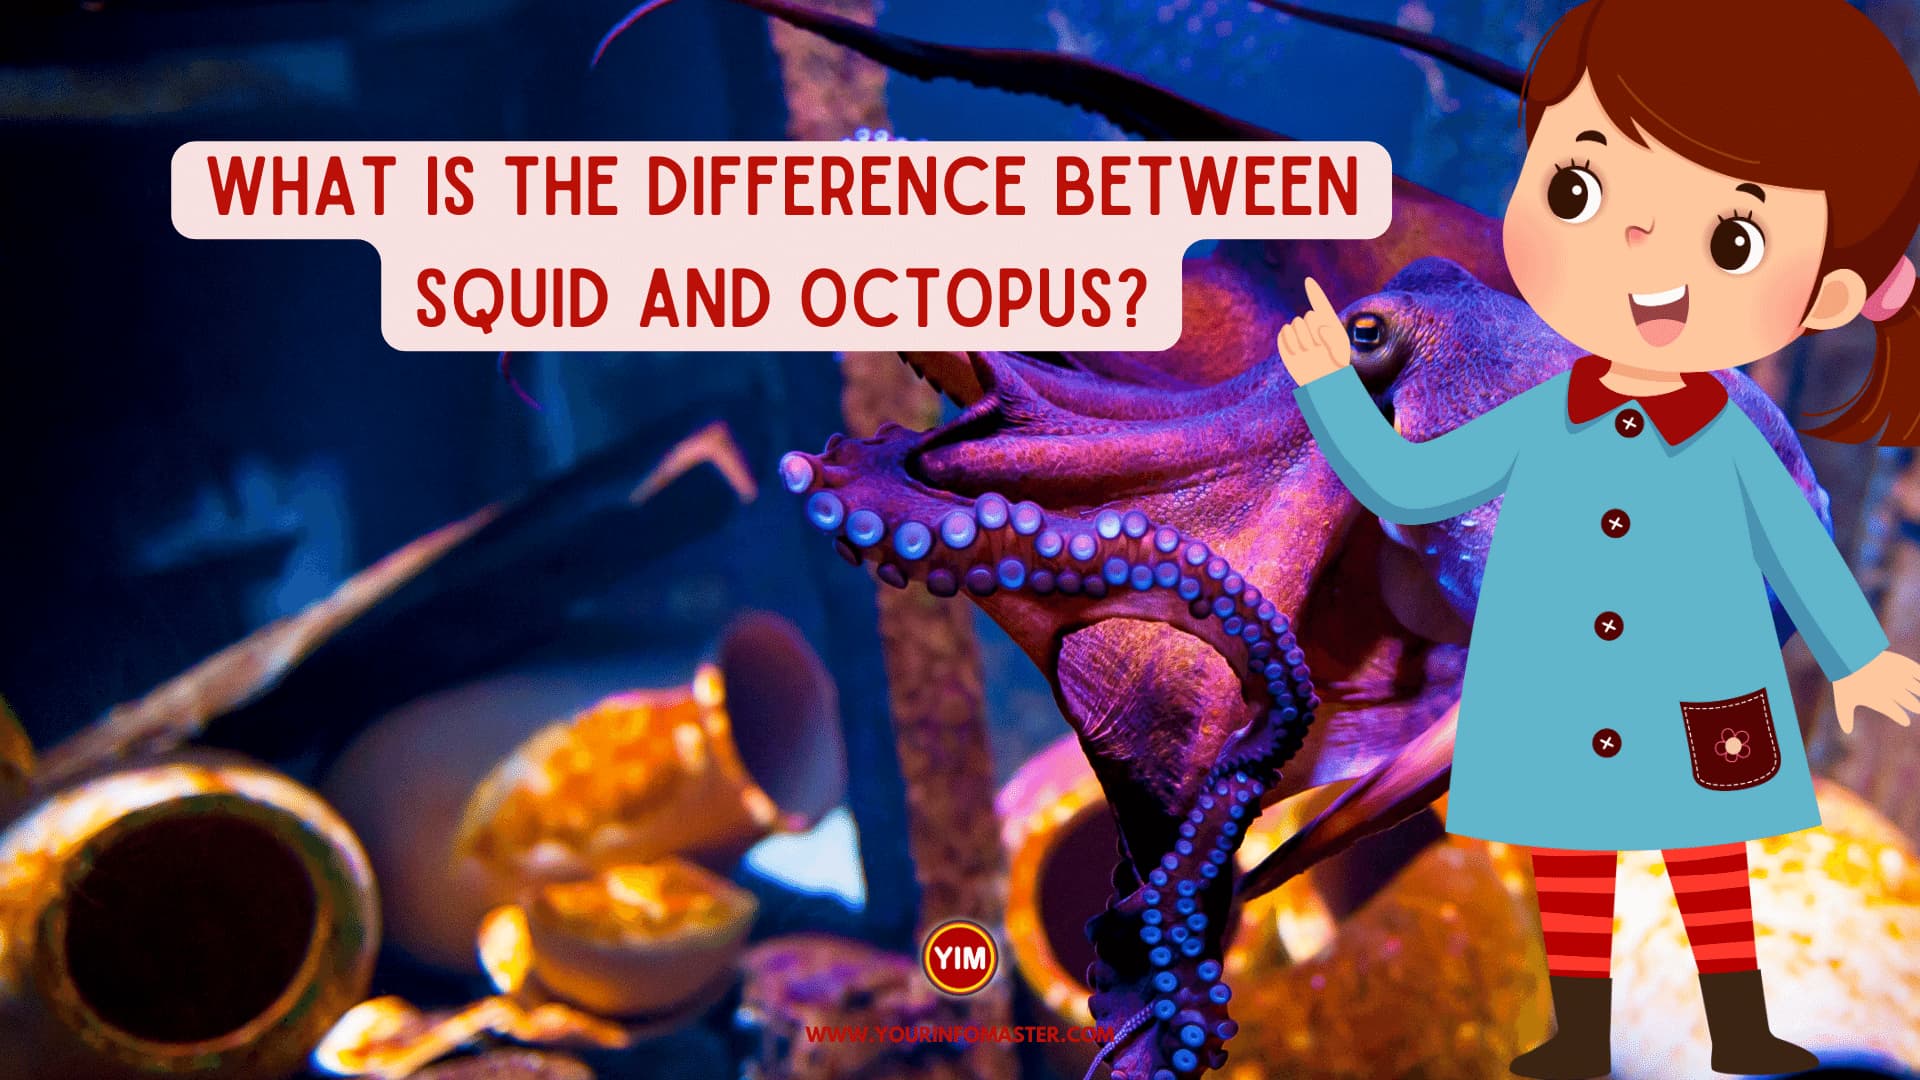 What is the difference between Squid and Octopus